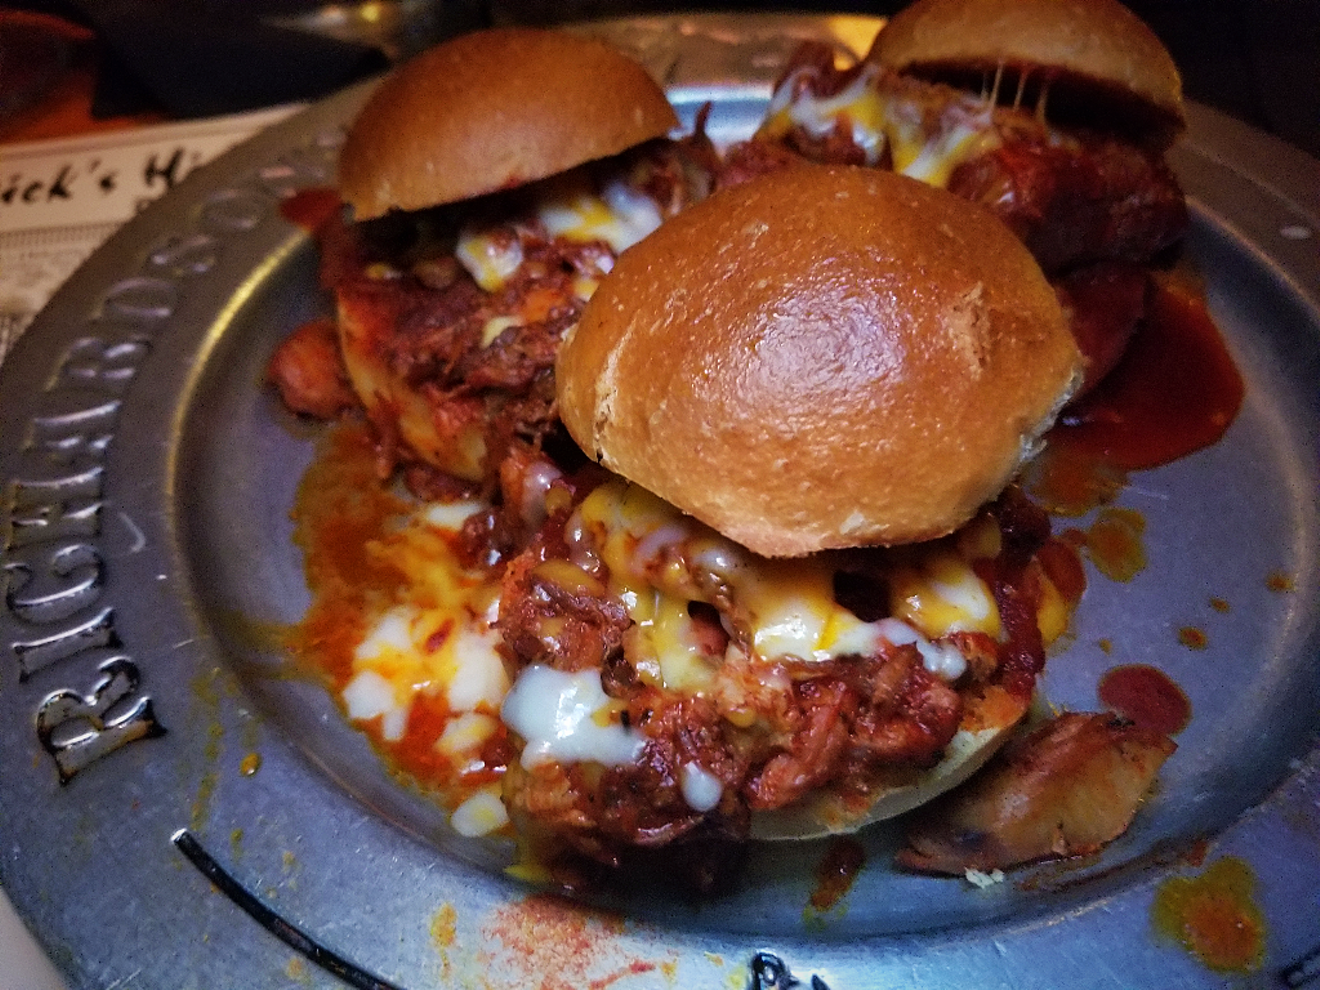 Saucy, cheesy adovada sliders are a house staple at this classic uptown Phoenix restaurant and bar.